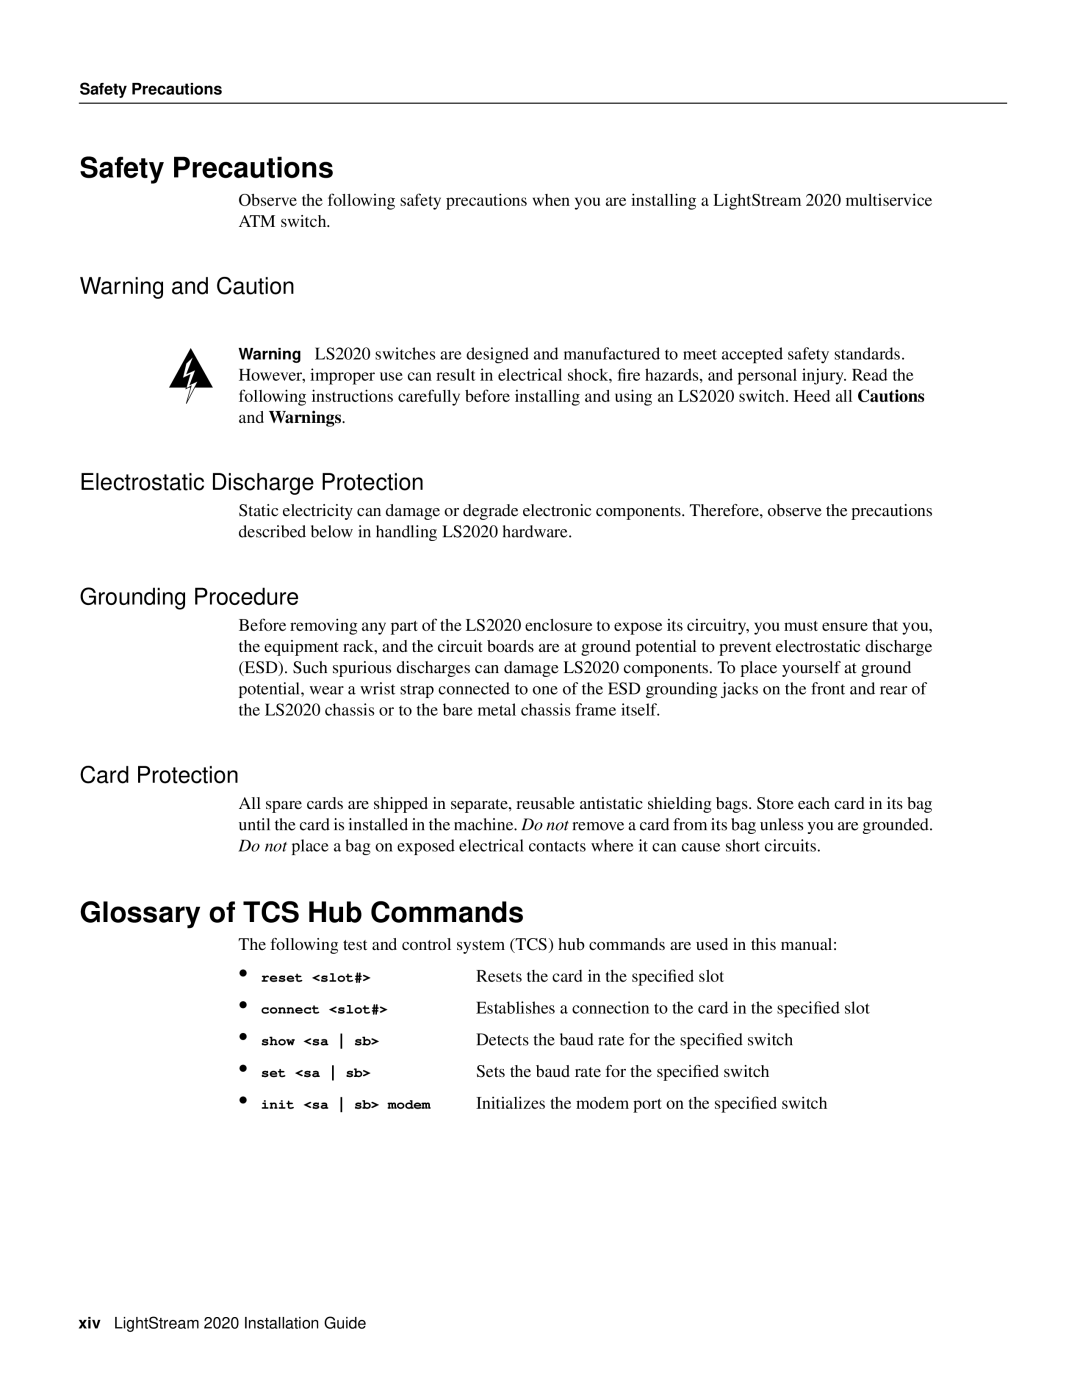 Cisco Systems LS2020 manual Safety Precautions, Glossary of TCS Hub Commands, Warning and Caution, Grounding Procedure 